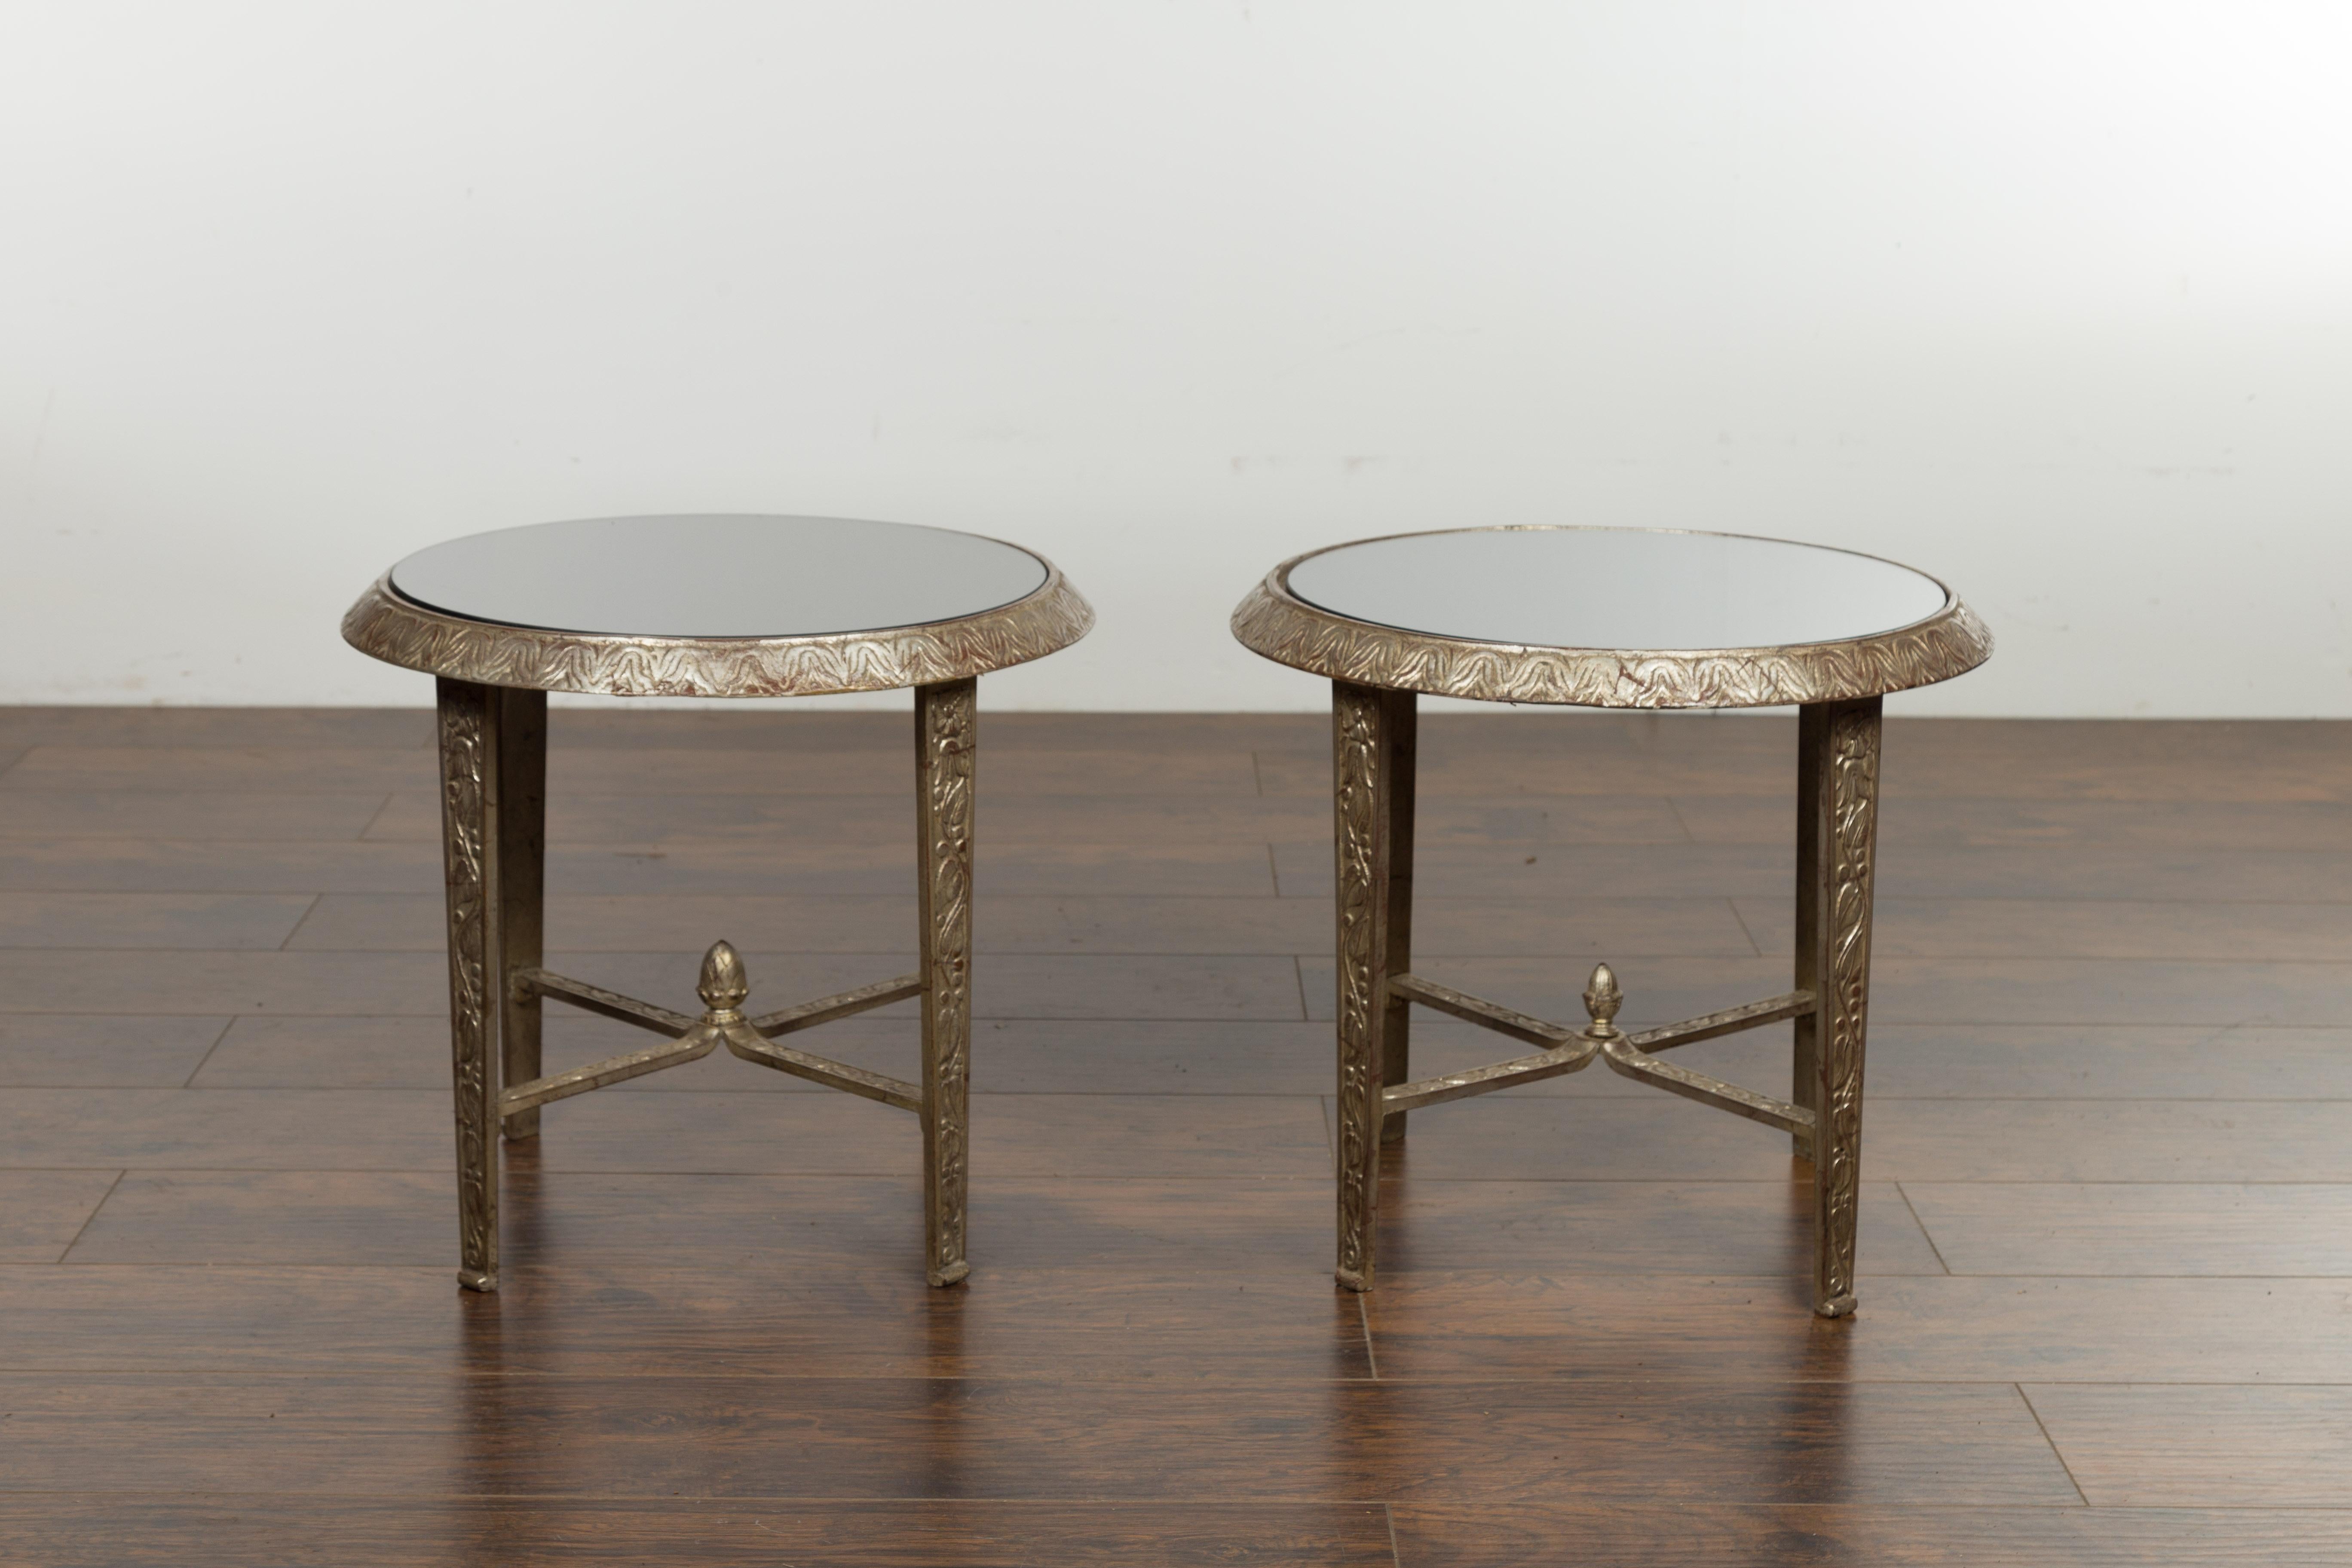 Two silver metal low drinks tables from the early 20th century, with black glass tops and acorn finials, priced and sold $2,400 each. Created during the first quarter of the 20th century, each table features a circular black glass top secured within